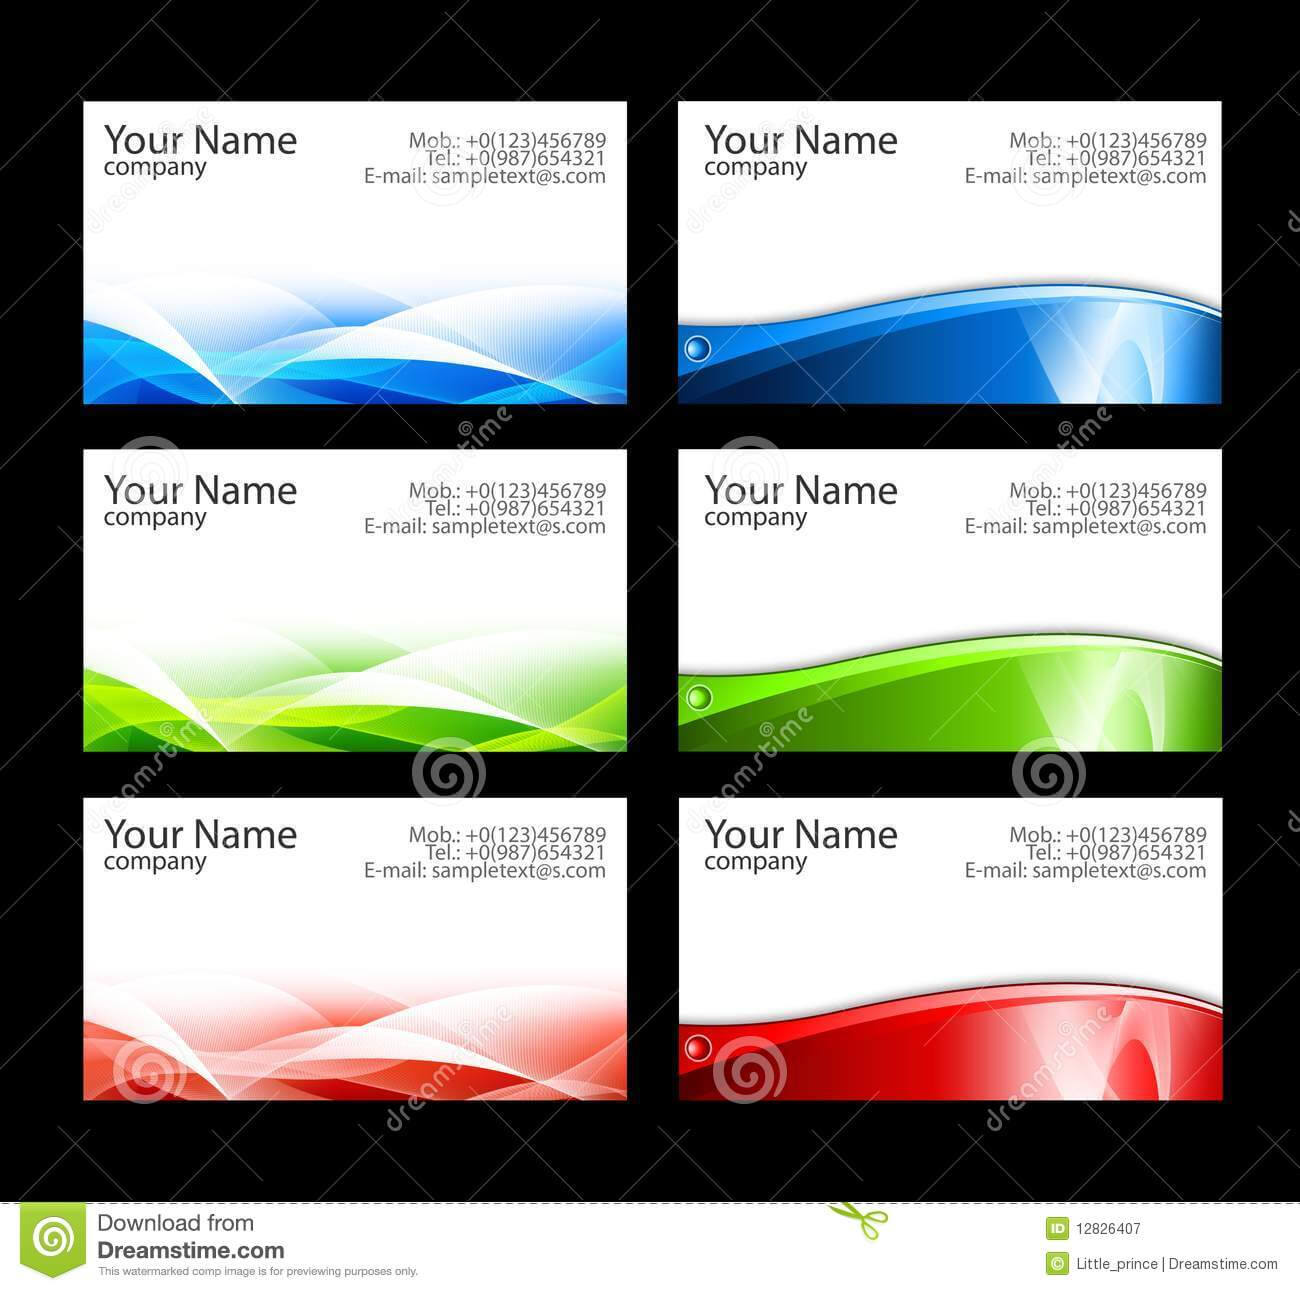 Templates For Visiting Cards Free Downloads